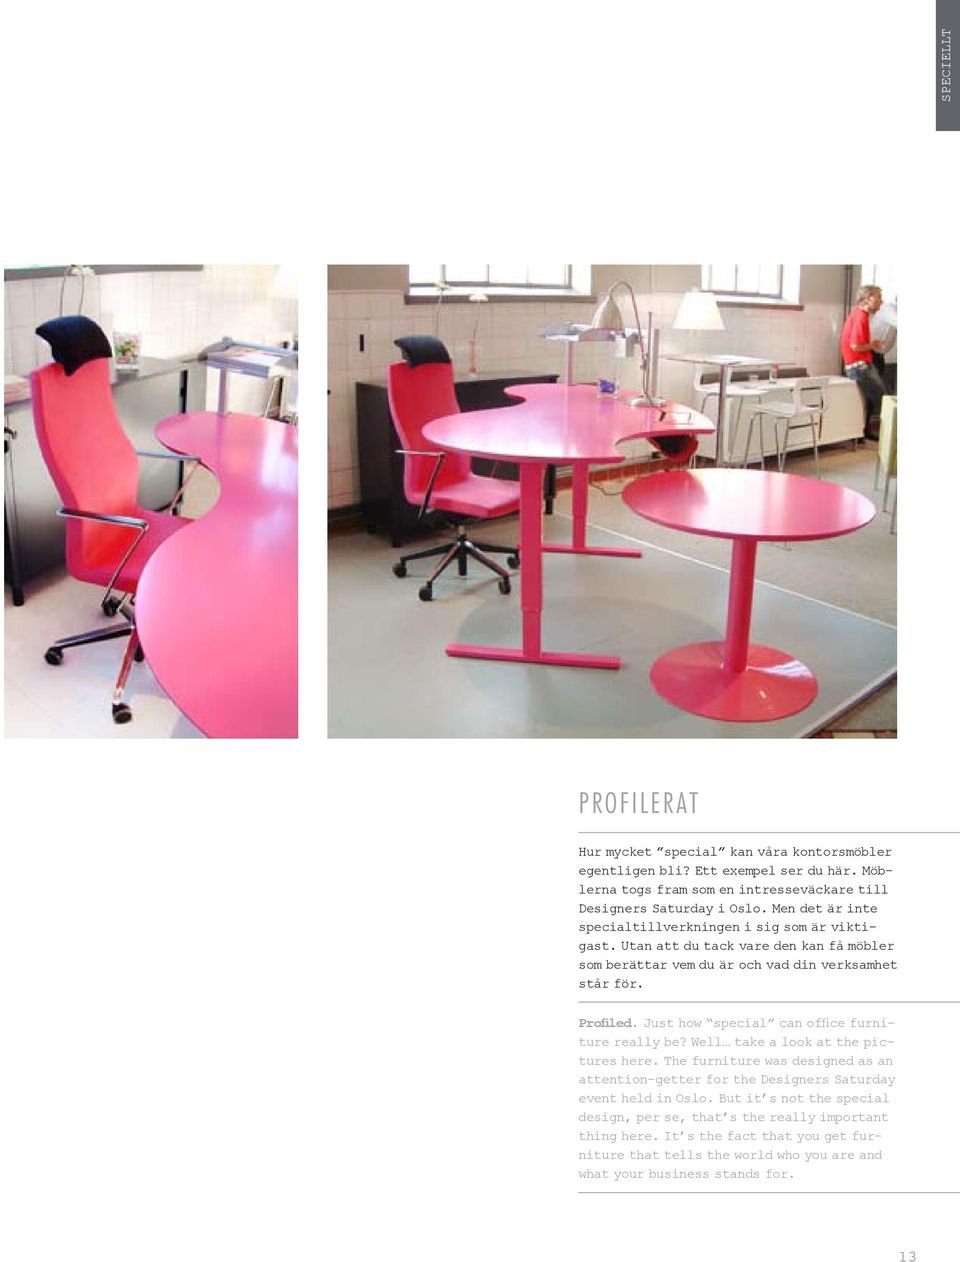 Just how special can office furniture really be? Well take a look at the pictures here.